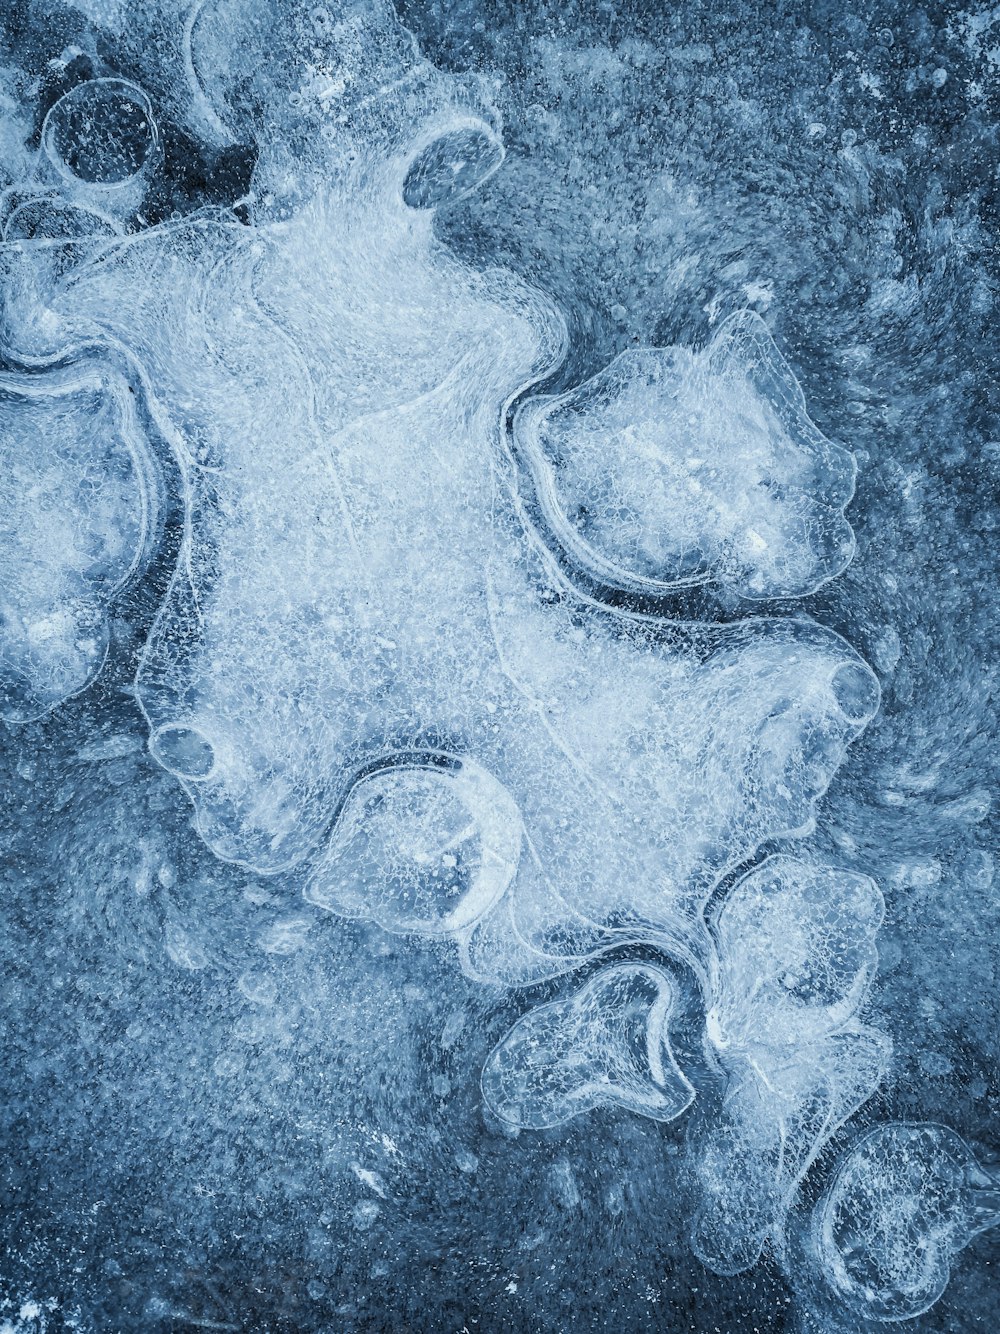 a frozen surface with ice and water bubbles